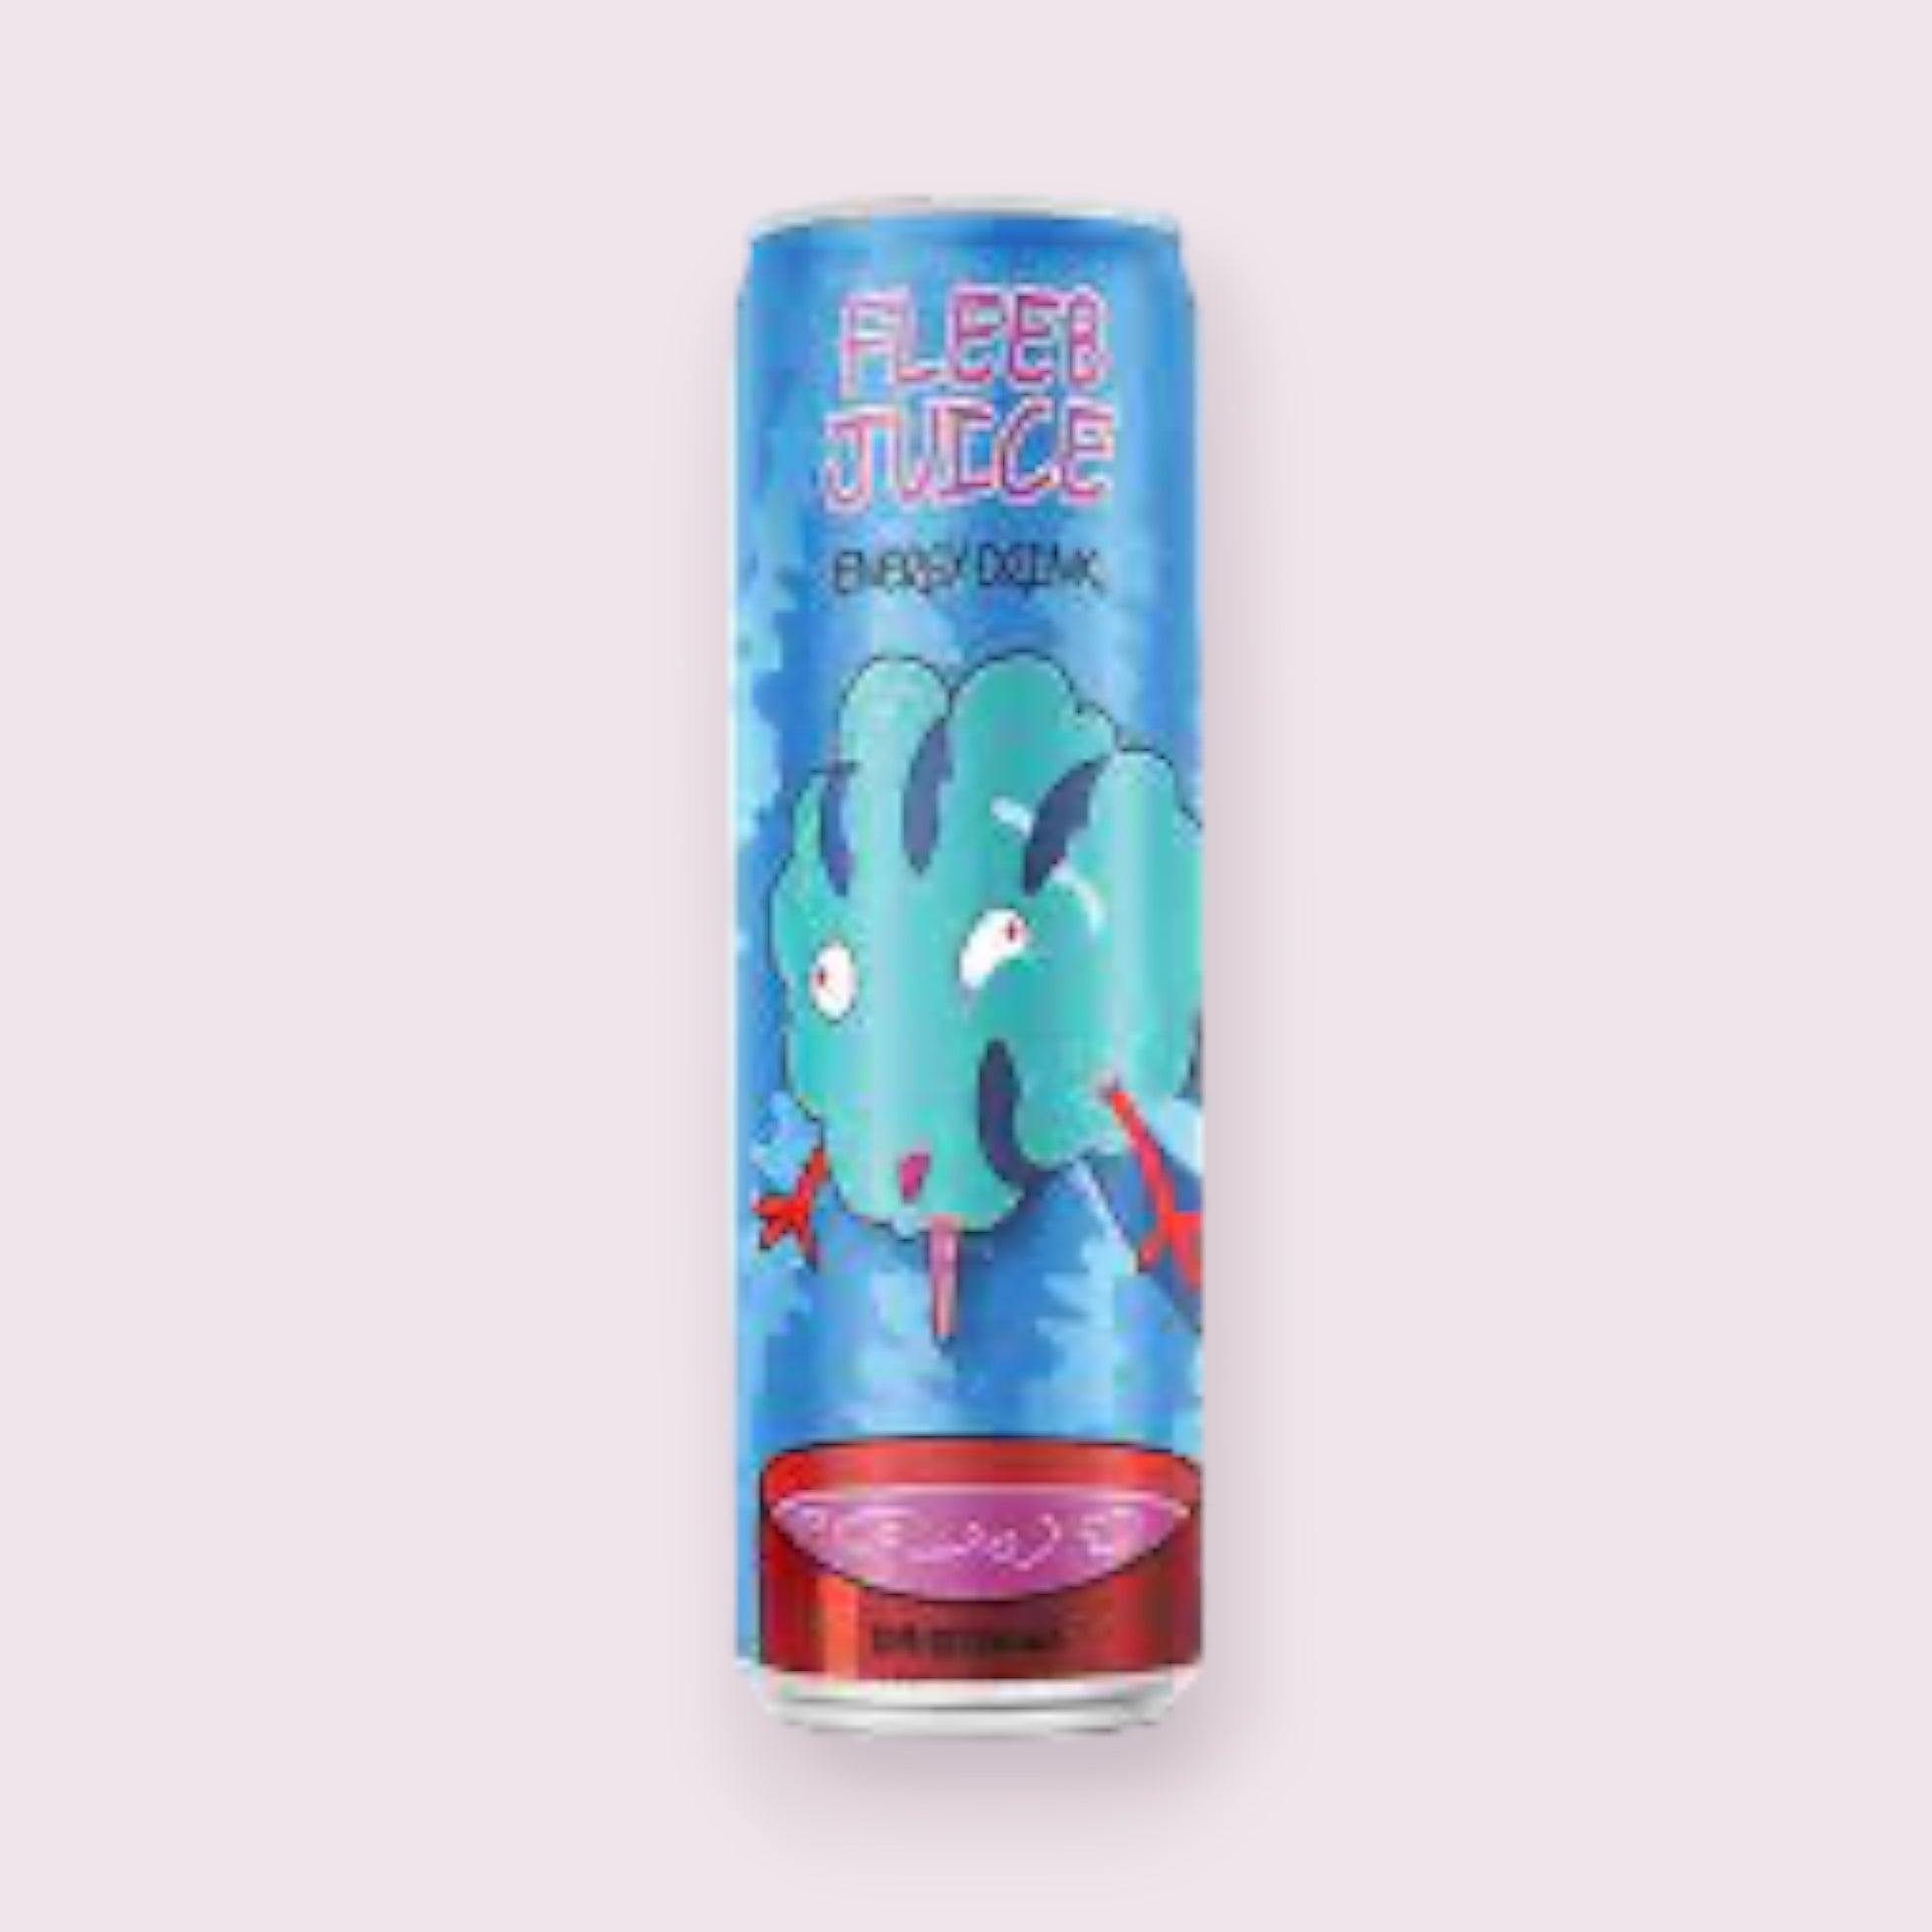 Rick and Morty Fleeb Juice Energy Drink  Pixie Candy Shoppe   